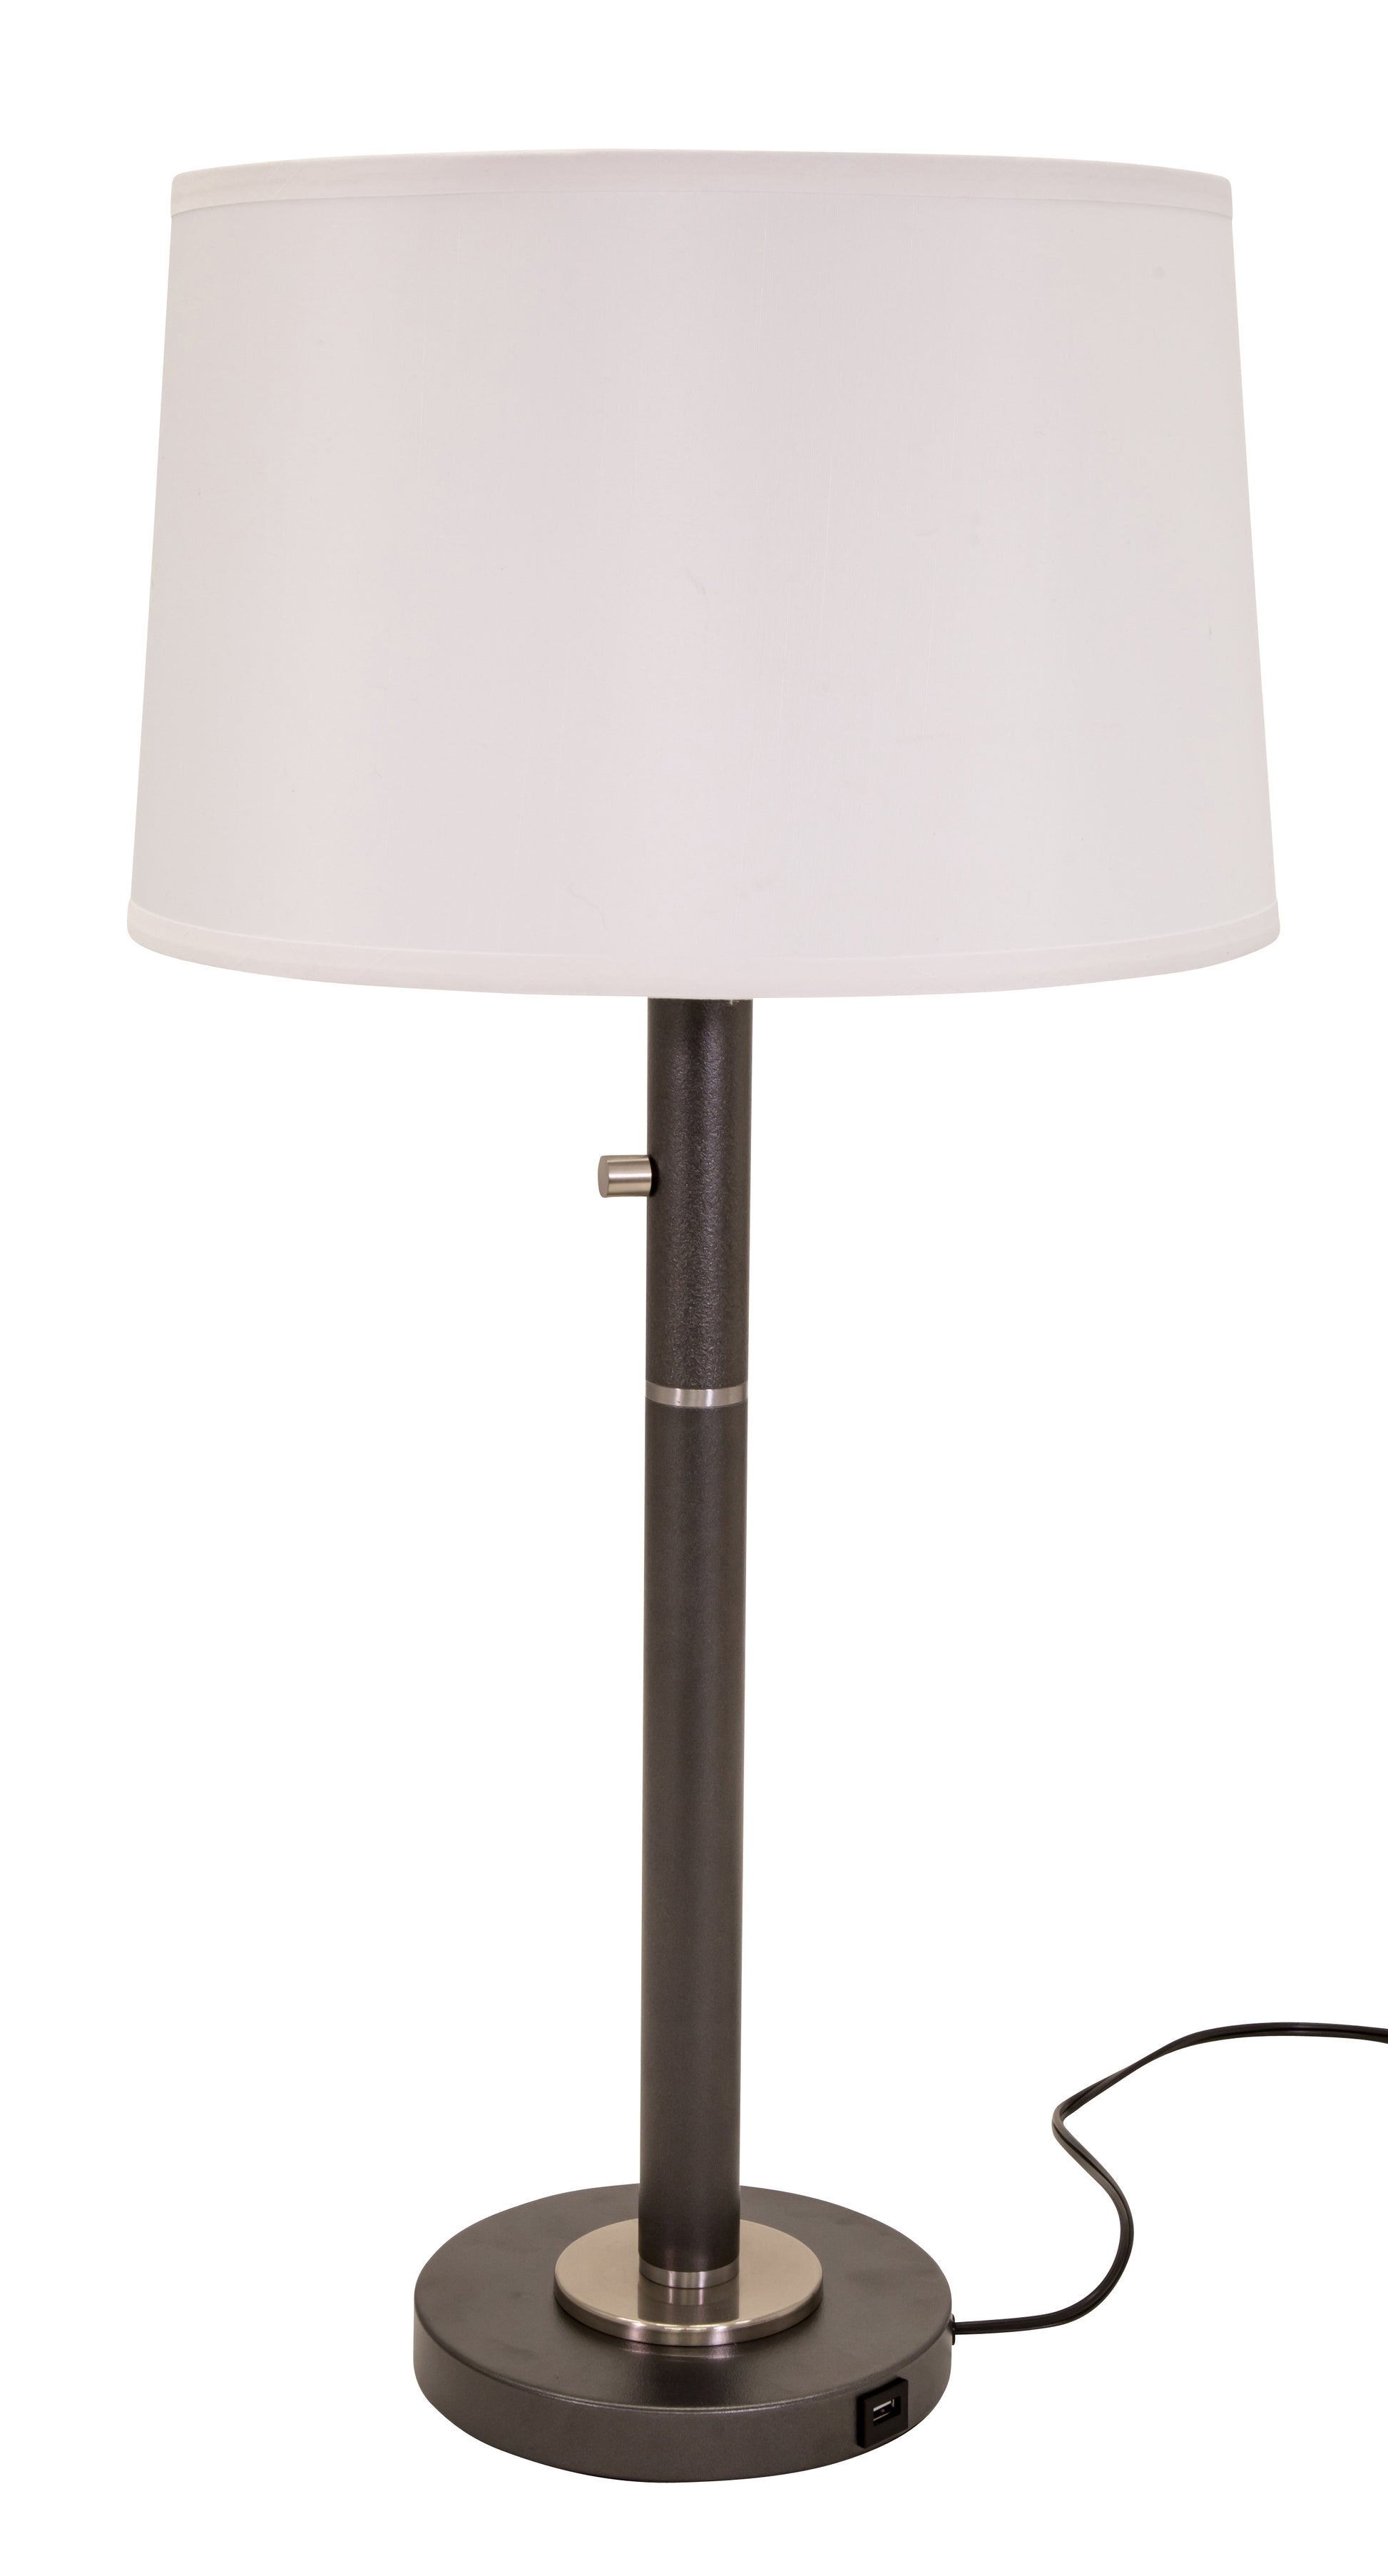 House of Troy Rupert 3-Way Table Lamp Granite Satin Nickel Accents USB Port RU750-GT